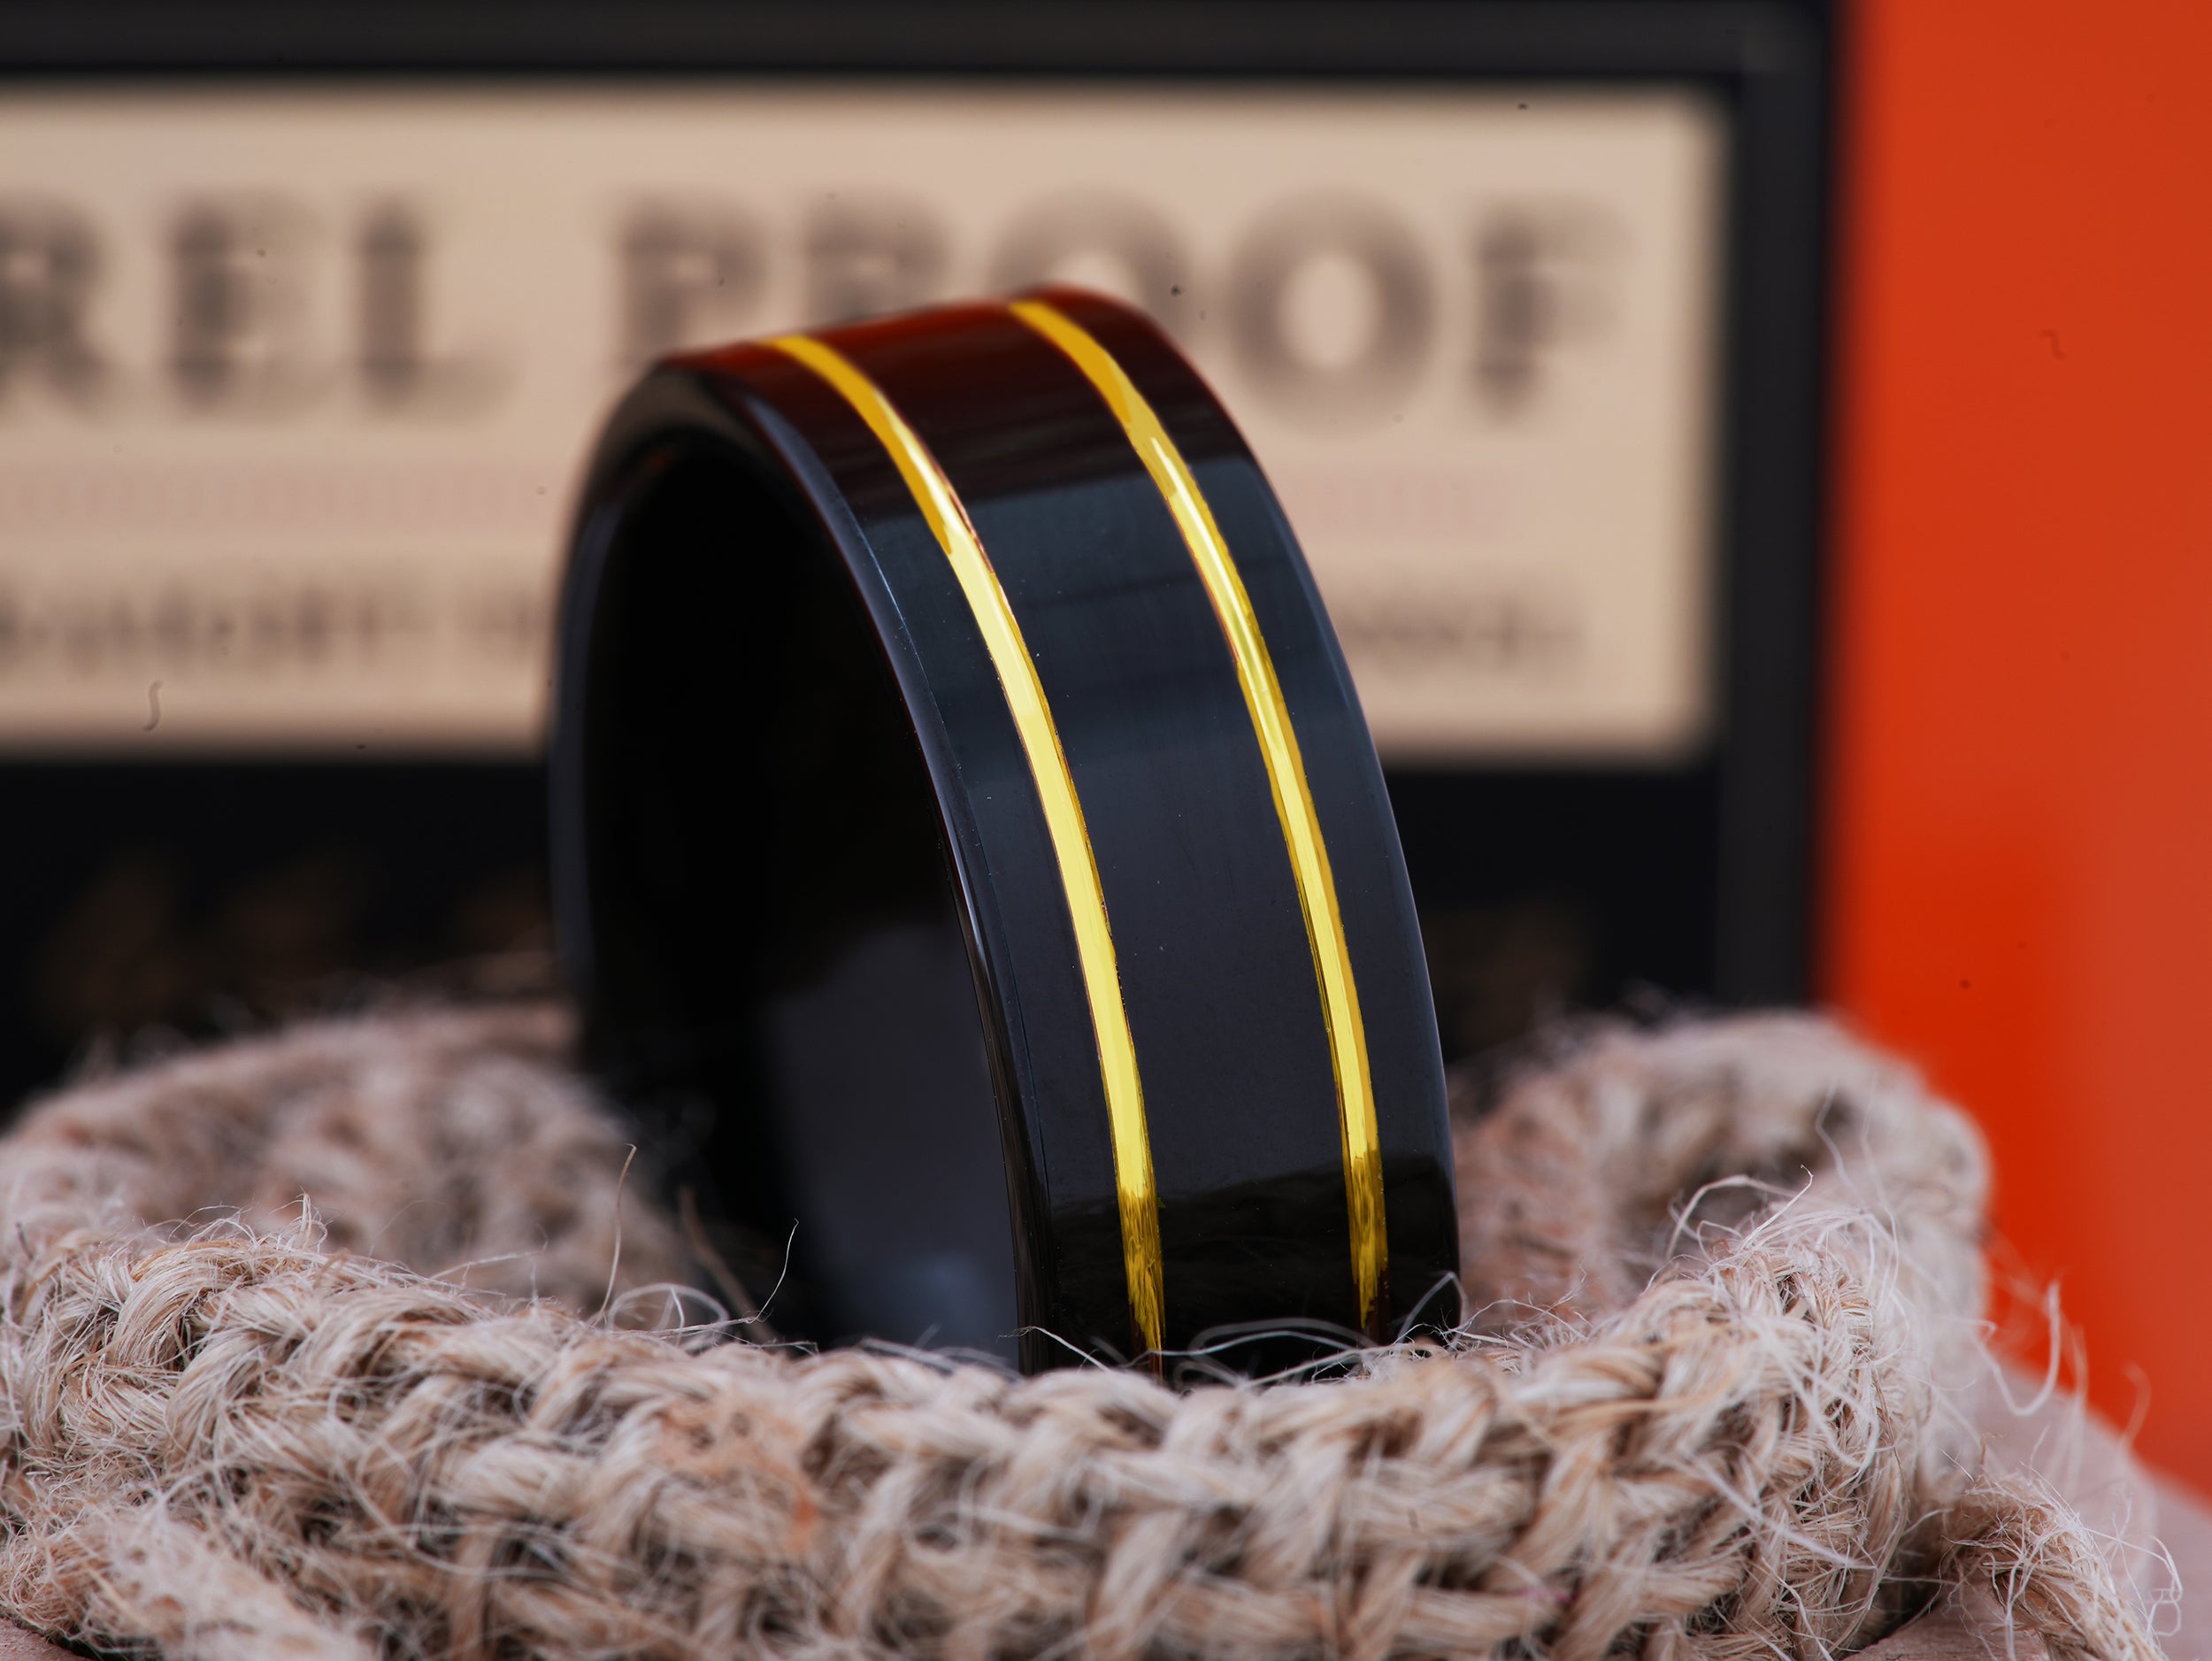 The Jupiter | Black Tungsten Ring with Two Gold Plated Grooves